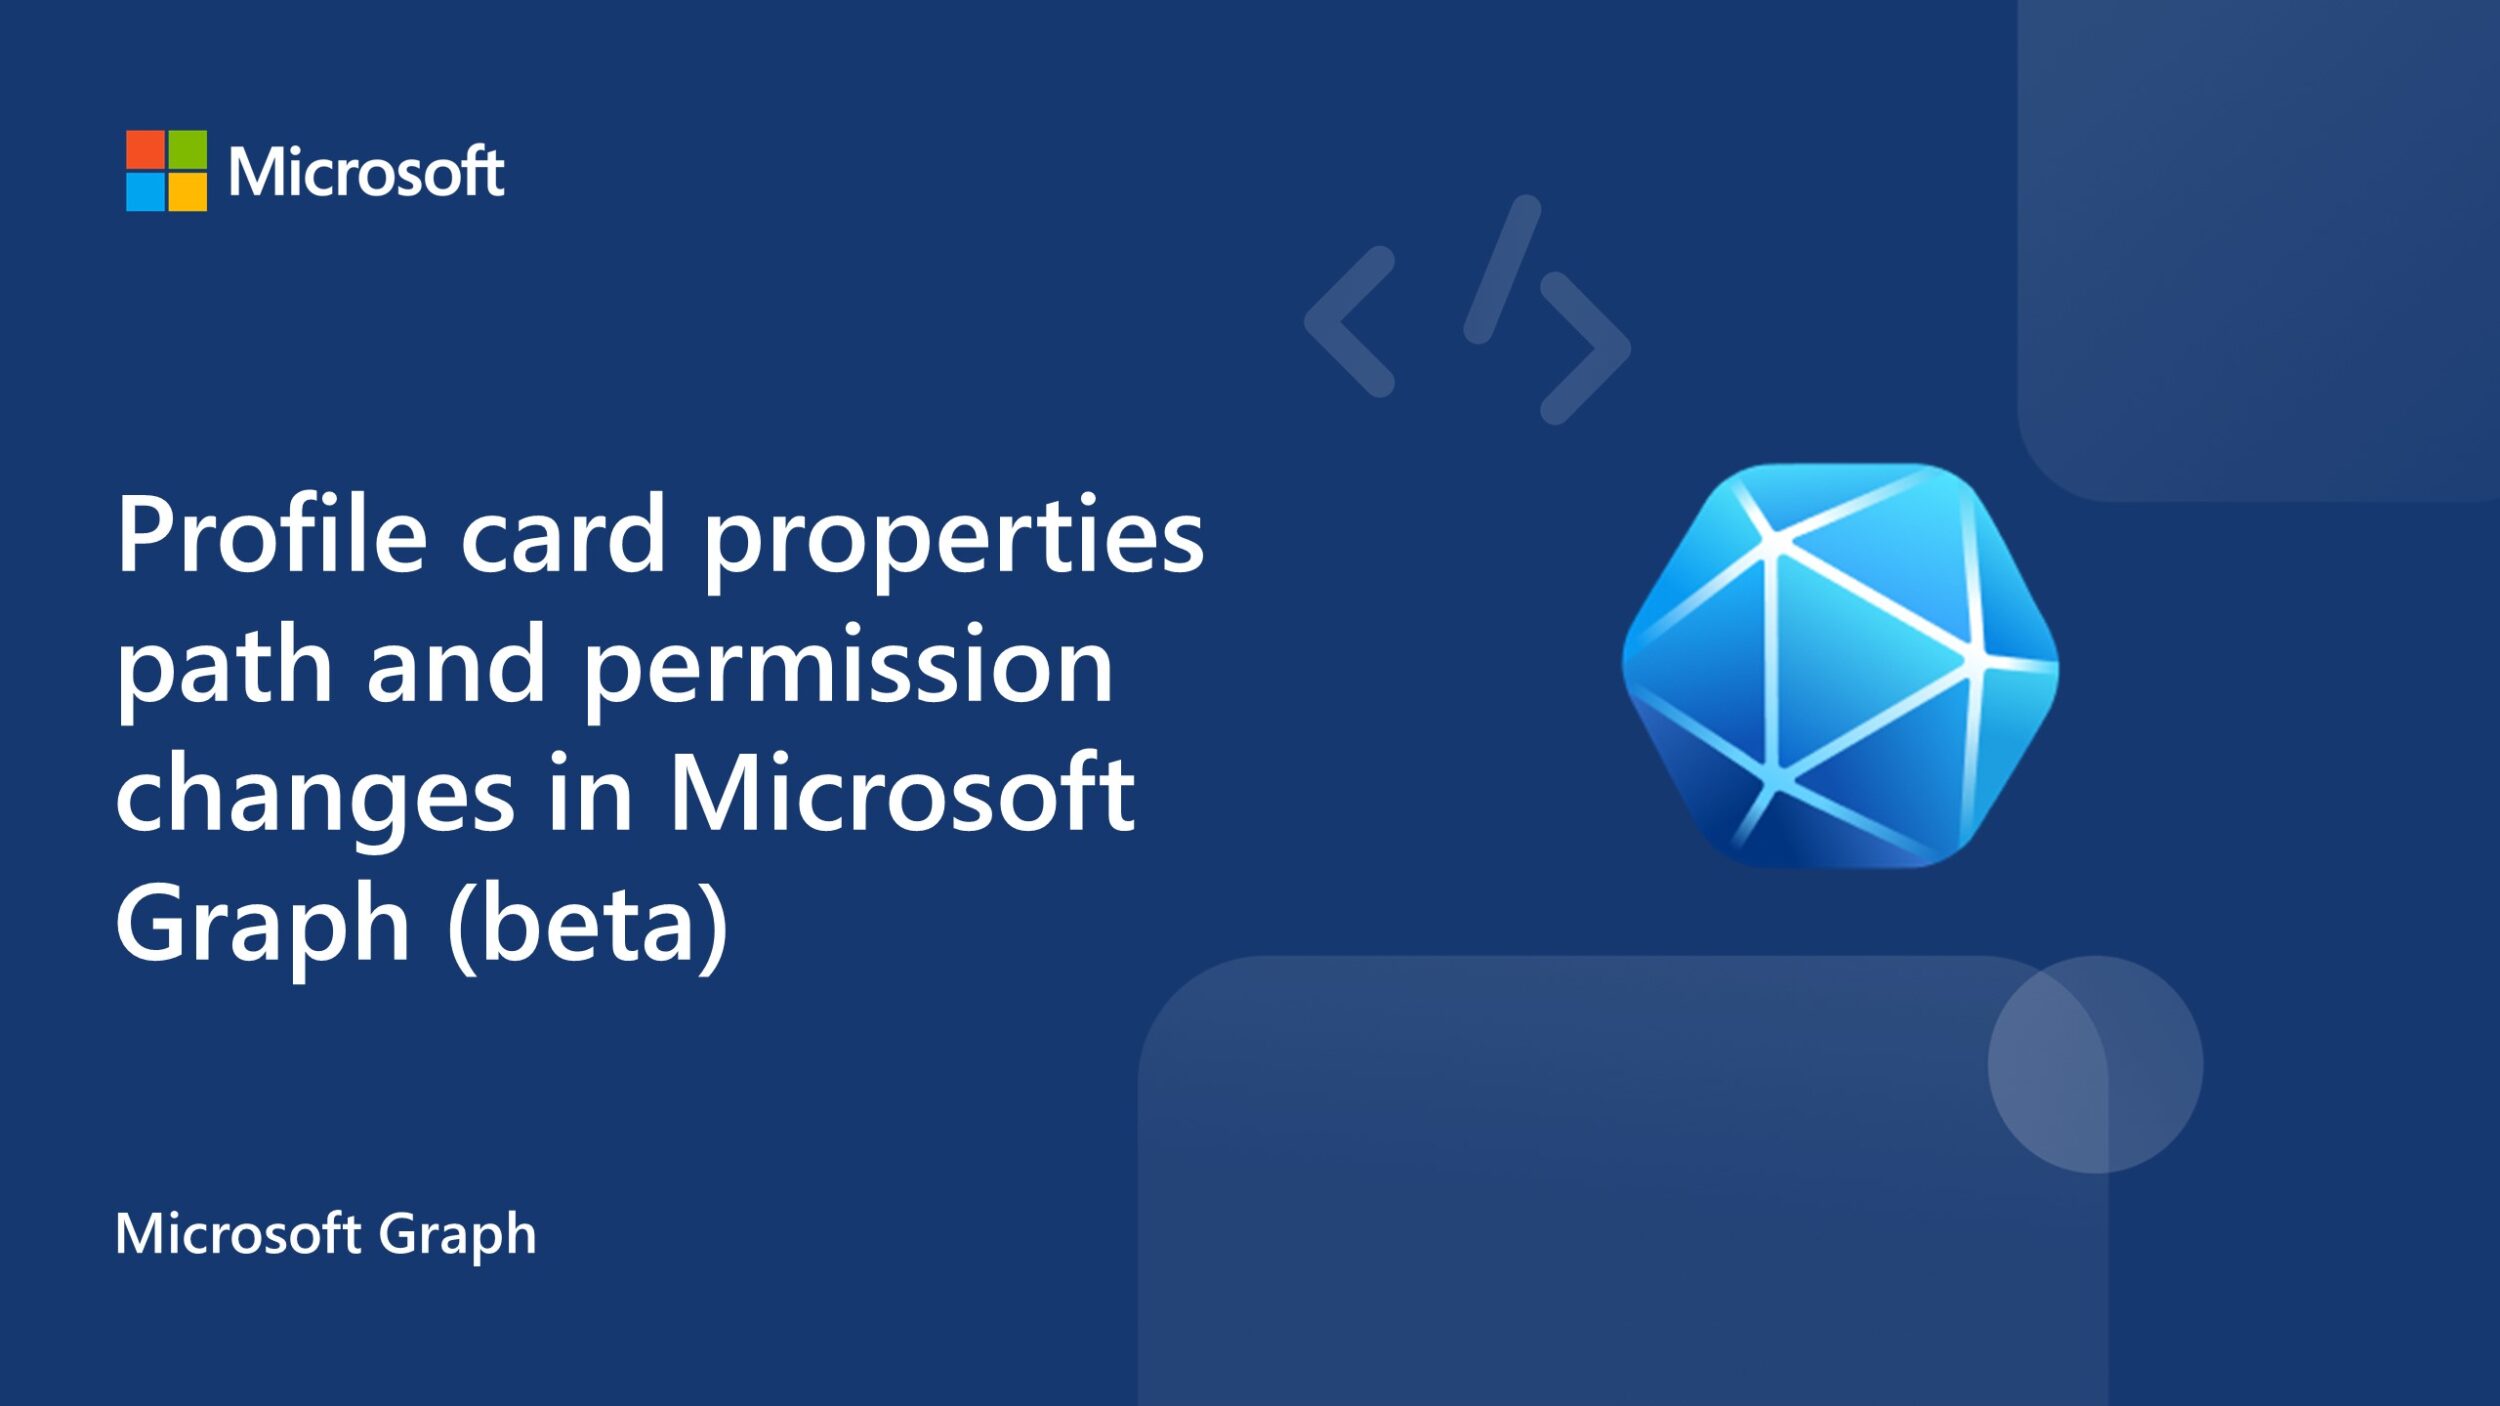 Profile card properties path and permission changes in Microsoft Graph (beta)